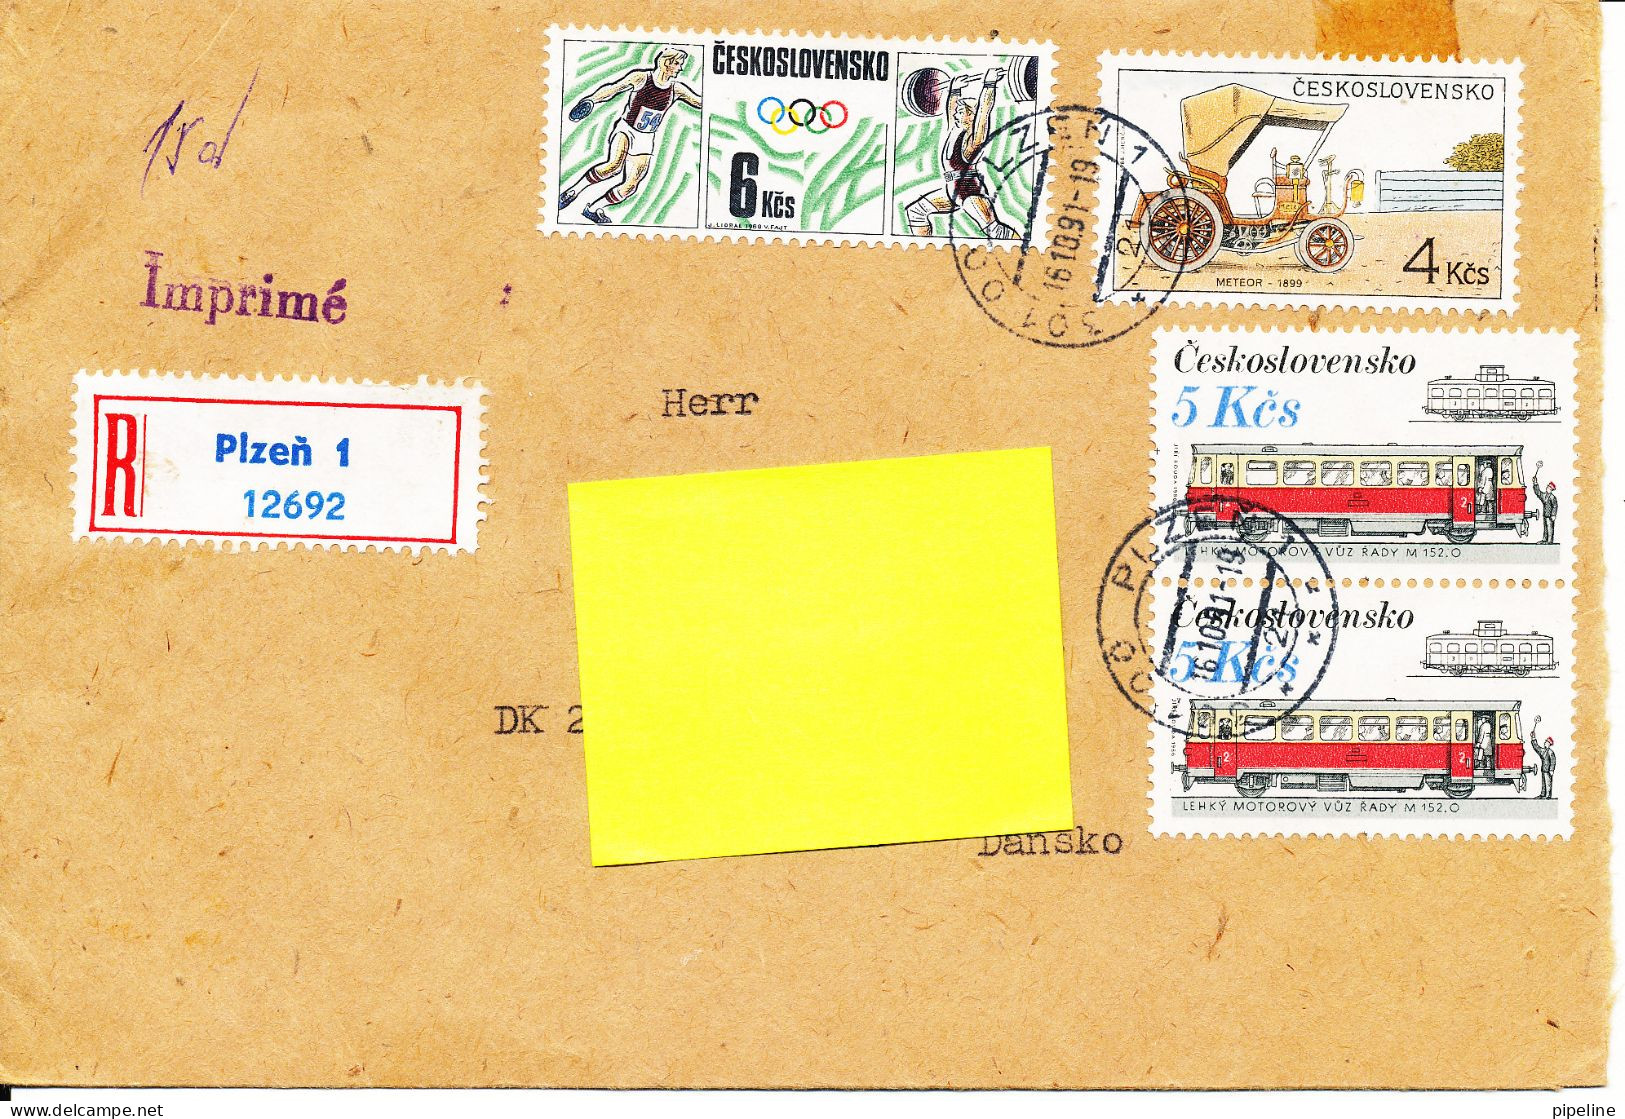 Czechoslovakia Registered Cover Sent To Denmark 16-10-1991 With More Topic Stamps - Storia Postale